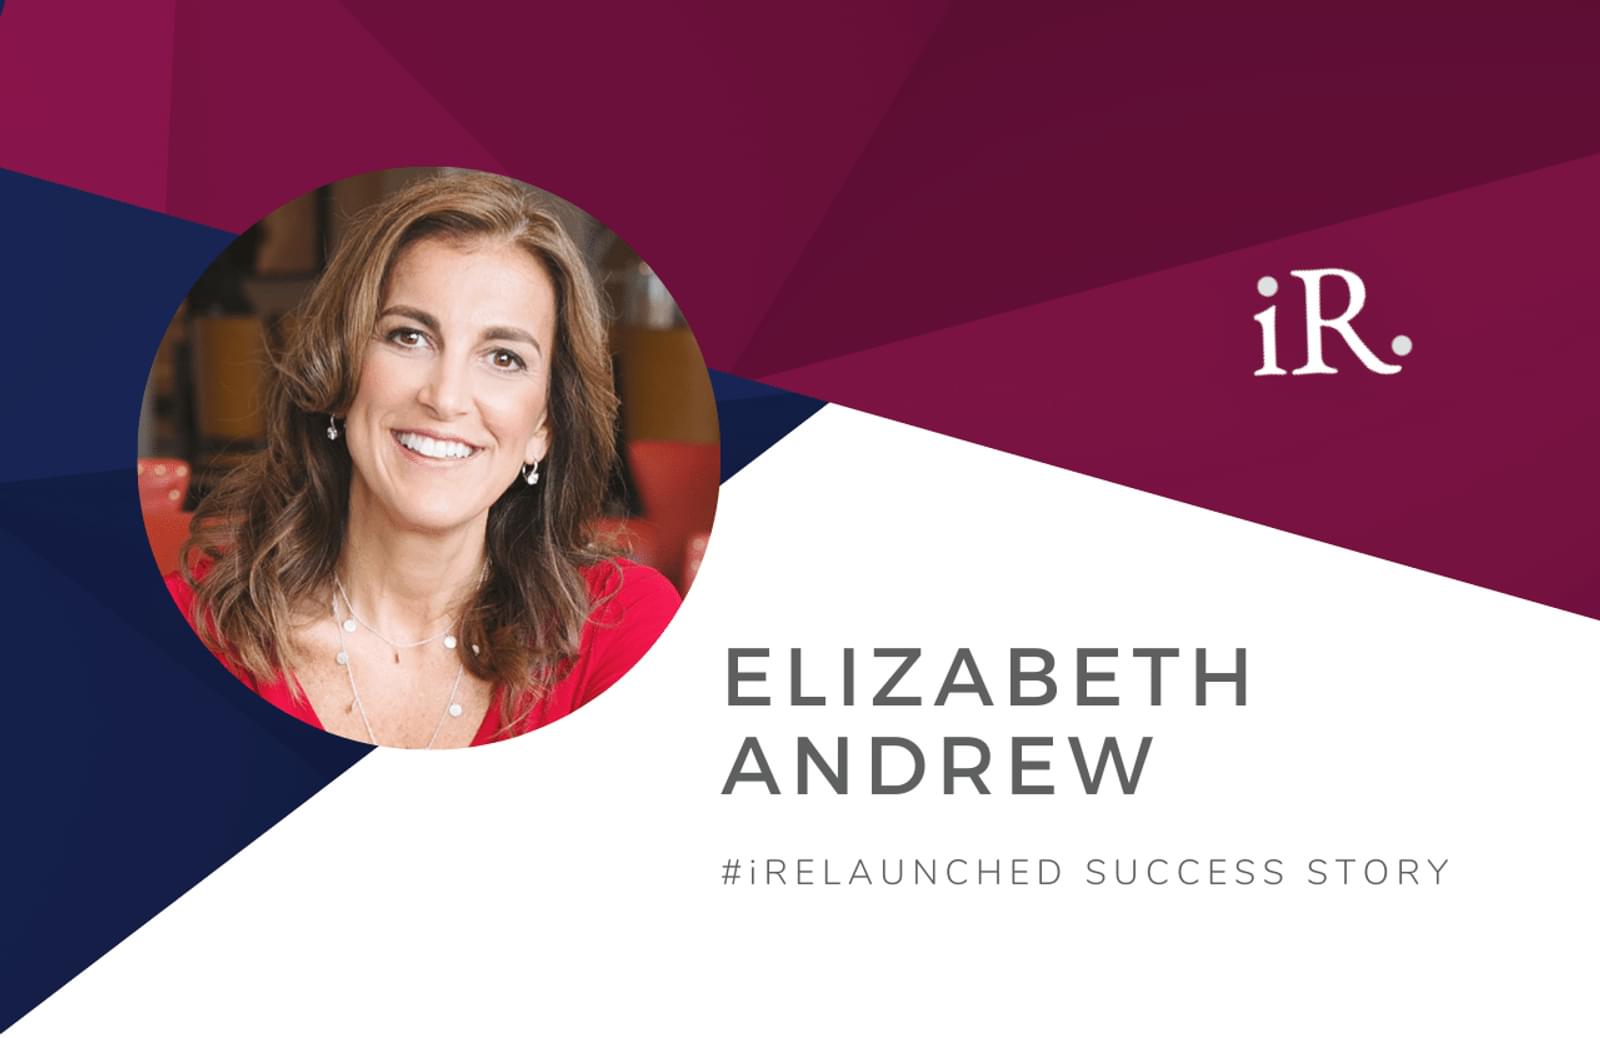 Elizabeth Andrew's headshot and the text #iRelaunched Success Story along with the iRelaunch logo.  A navy and maroon geometric textured background intersect behind Elizabeth's headshot.